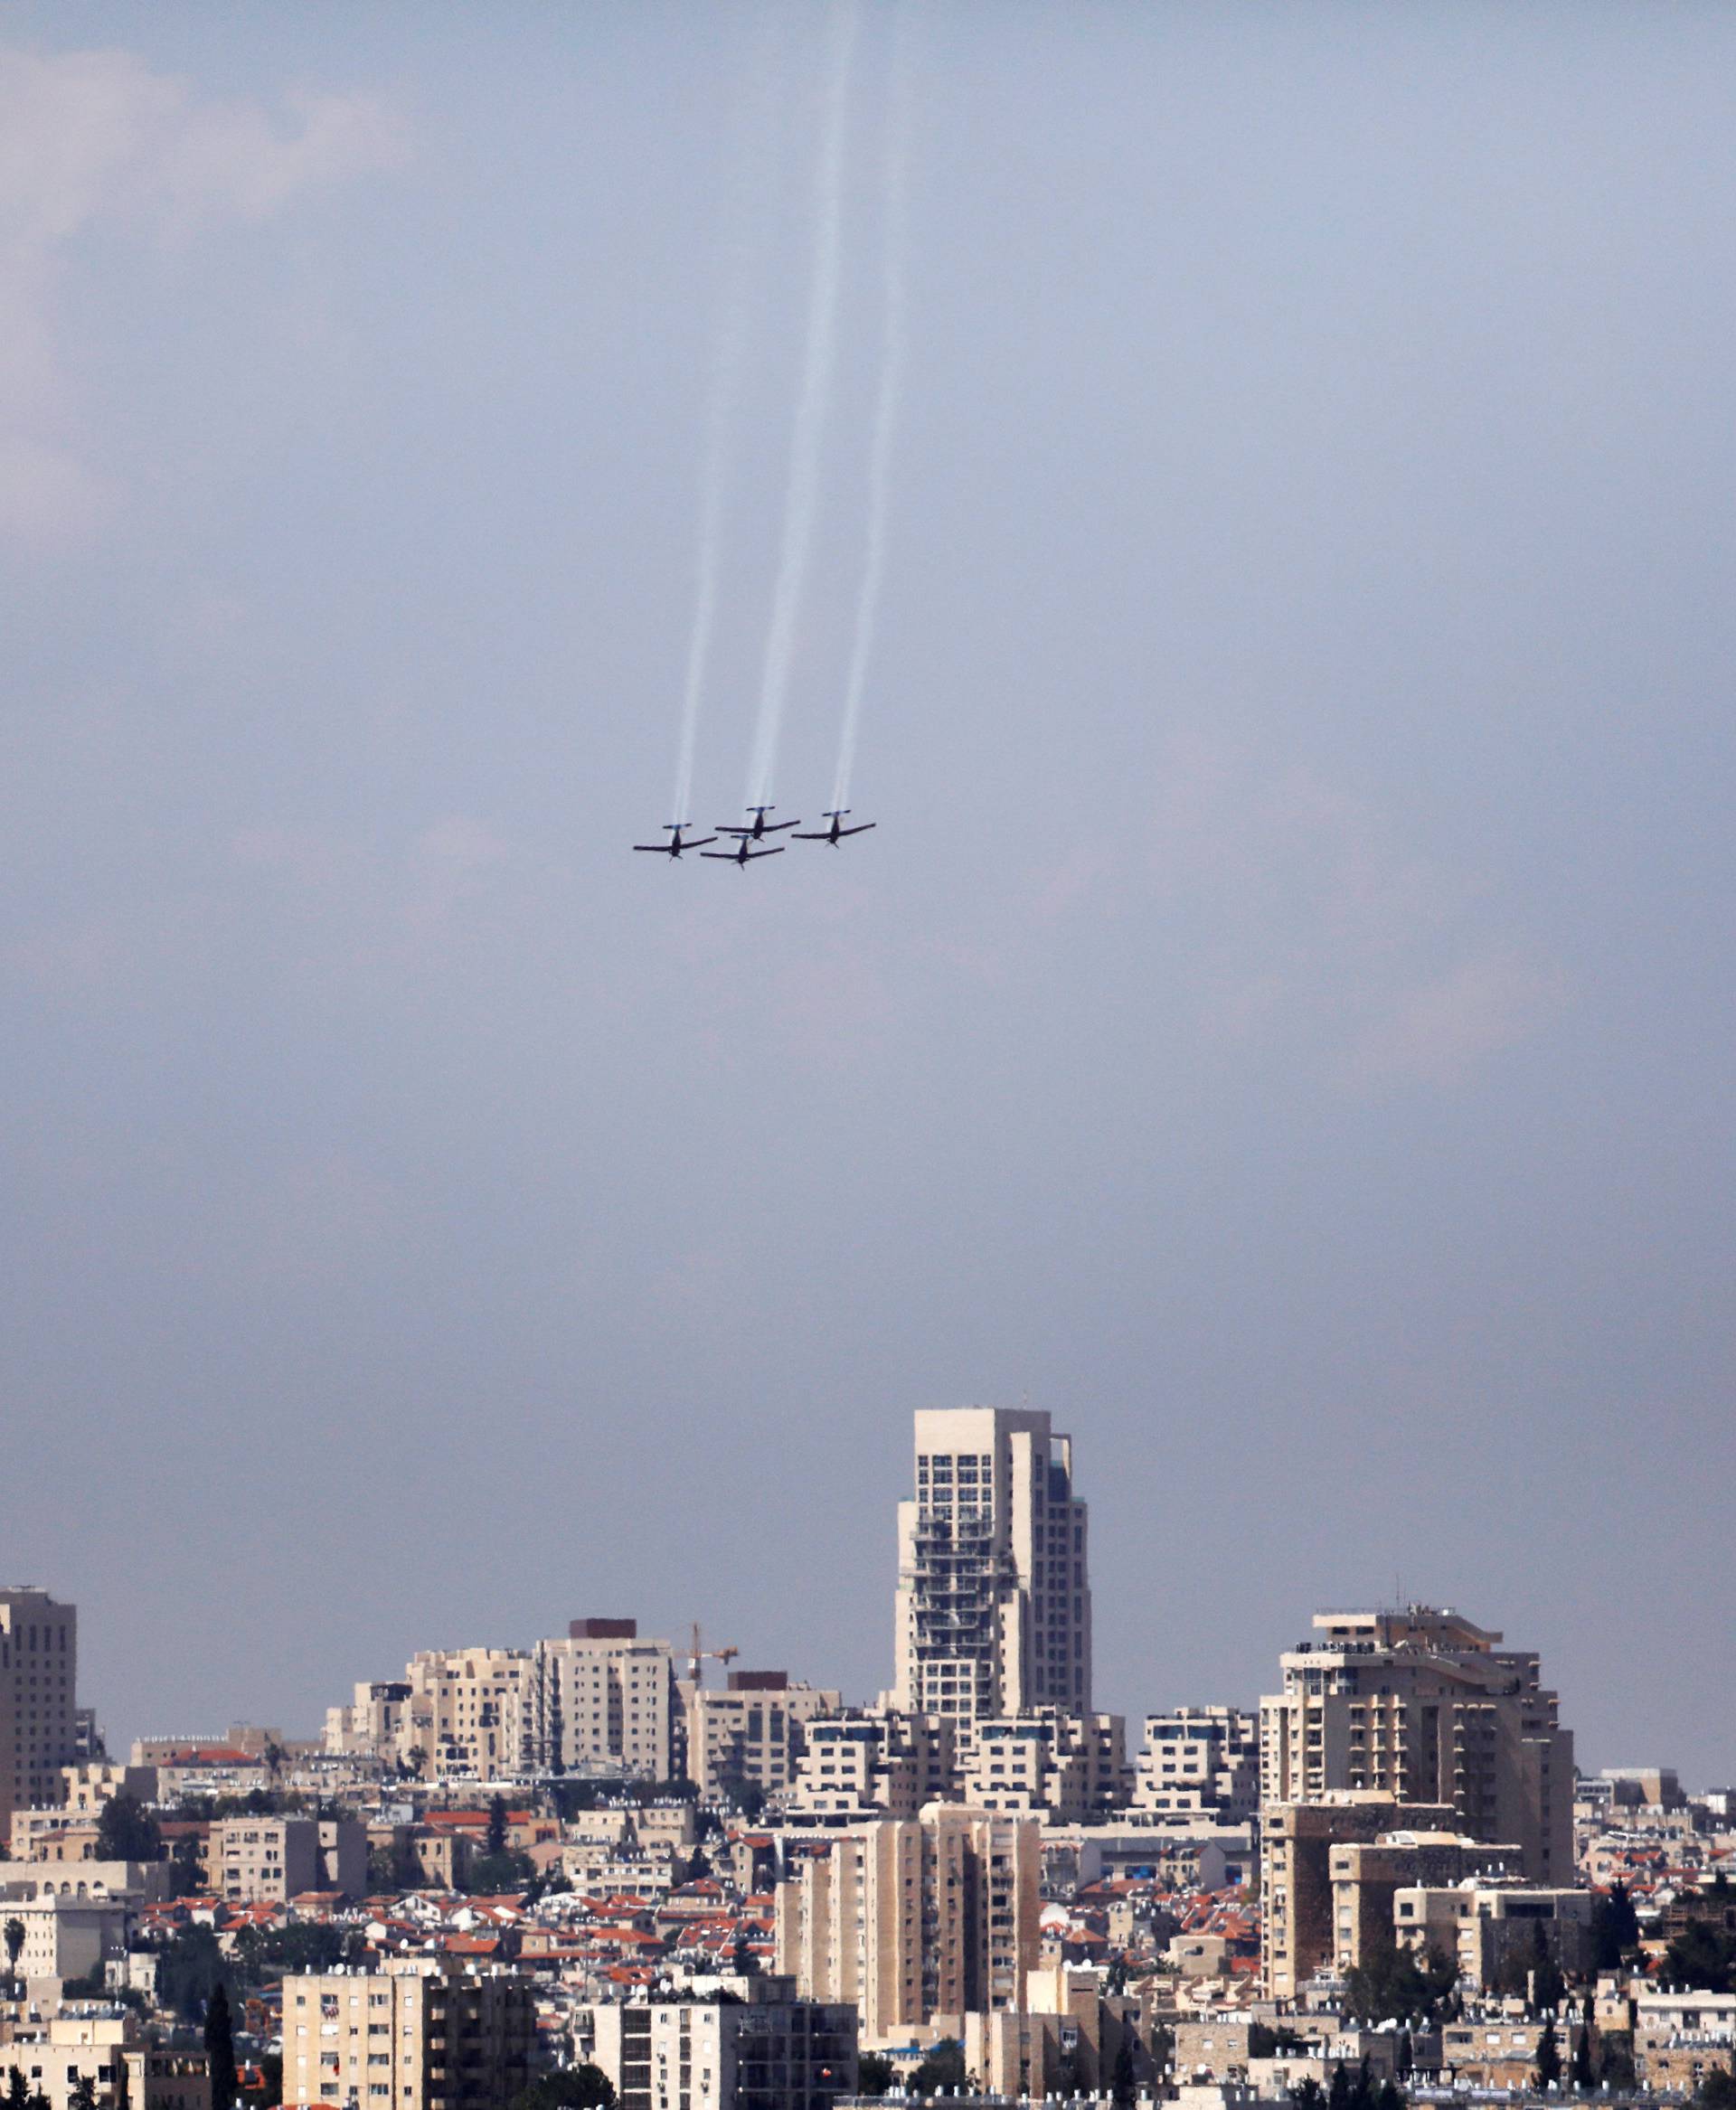 An Israeli Air Force aerobatic team flies in formation during a rehearsal for an aerial show for Israel's 70th Independence Day celebrations, in Jerusalem